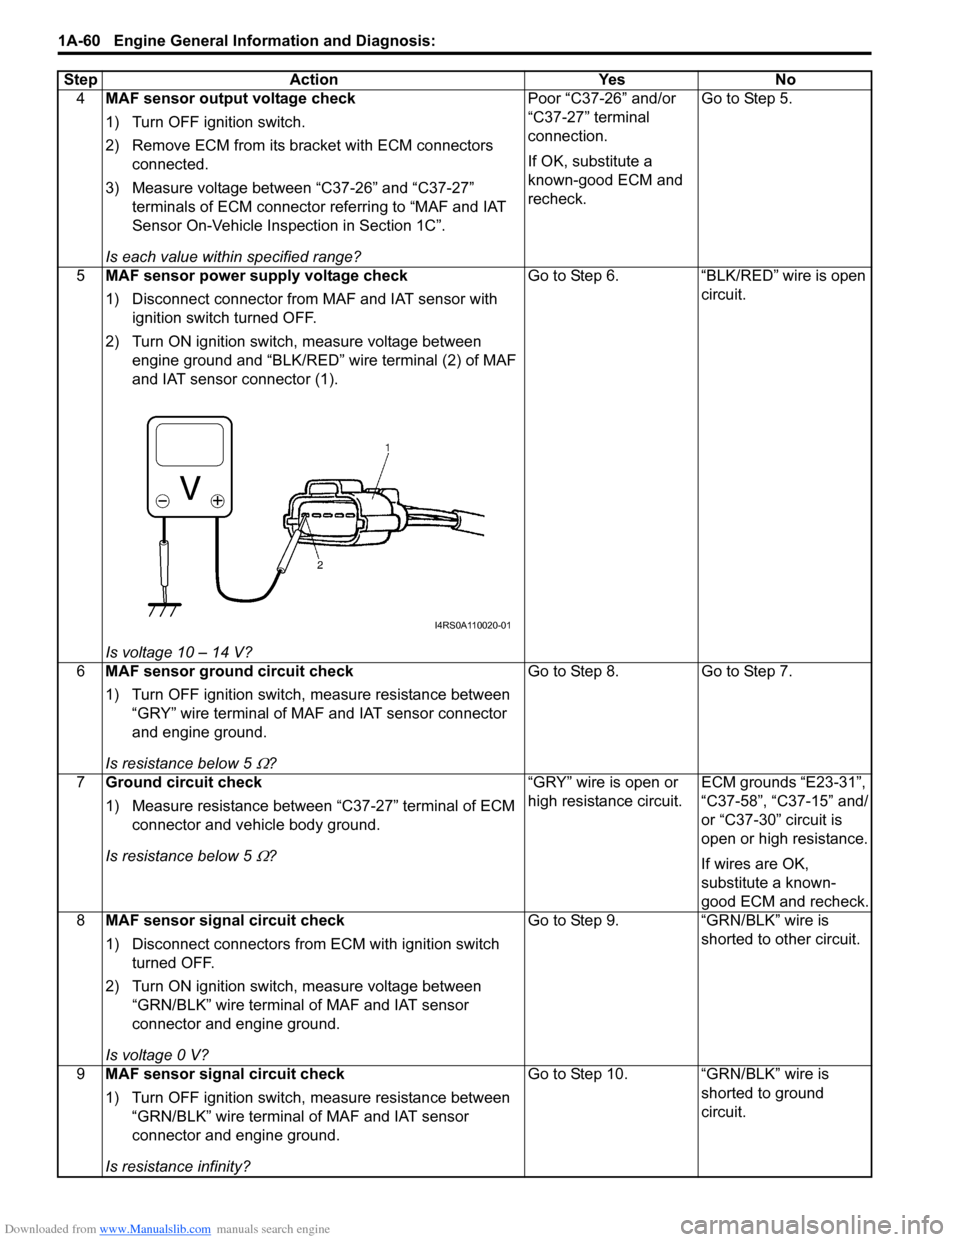 SUZUKI SWIFT 2005 2.G Service Workshop Manual Downloaded from www.Manualslib.com manuals search engine 1A-60 Engine General Information and Diagnosis: 
4MAF sensor output voltage check
1) Turn OFF ignition switch.
2) Remove ECM from its br acket 